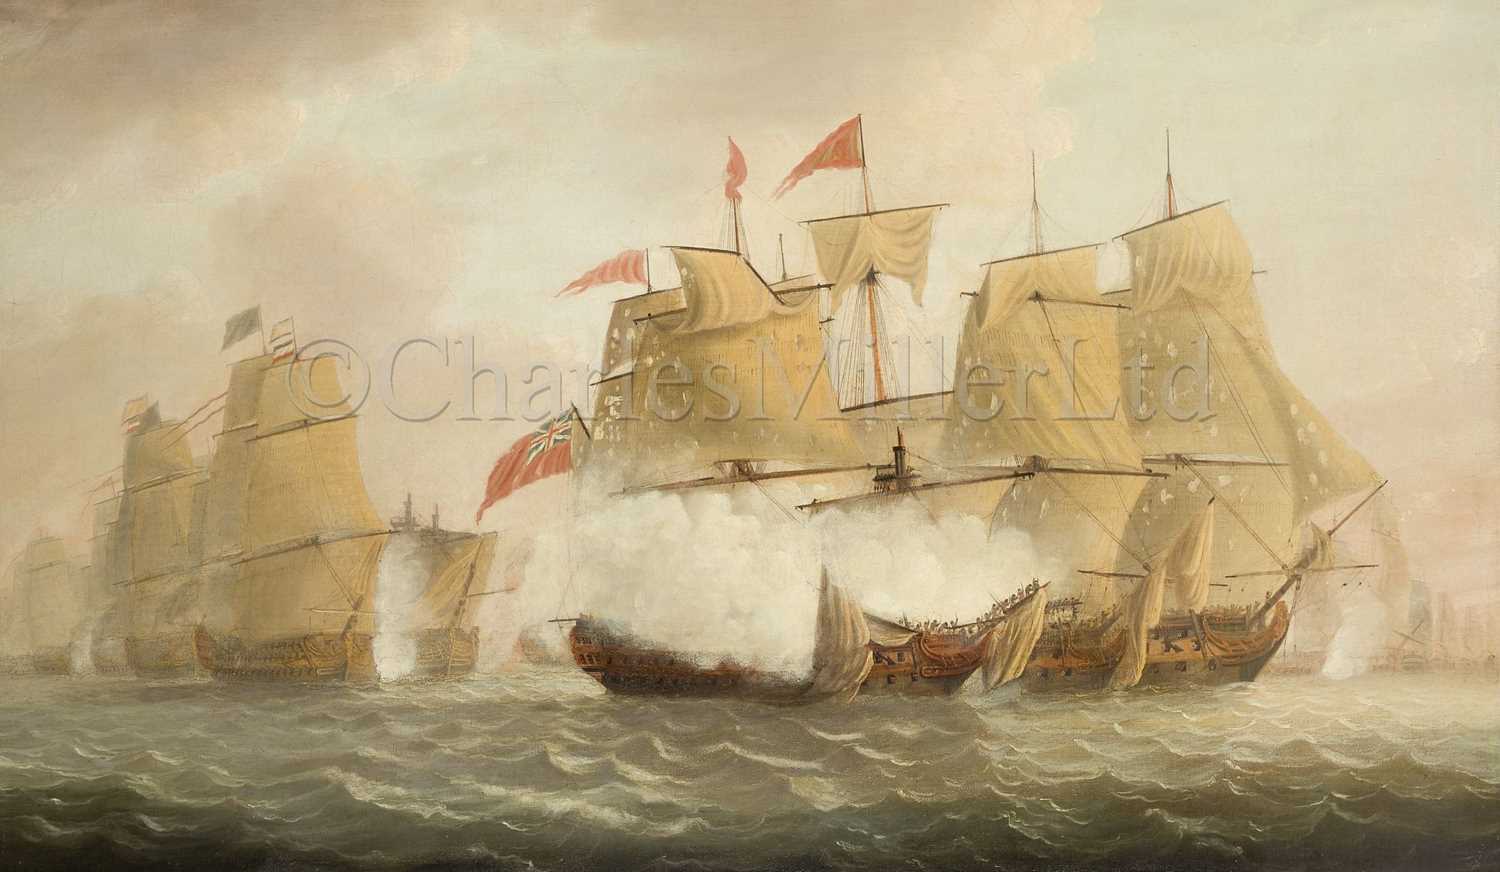 181 - A set of three pictures commissioned by John Jervis (1735-1823), later Earl St. Vincent, to commemorate his victory at the Battle of Cape St. Vincent, 14th February, 1797